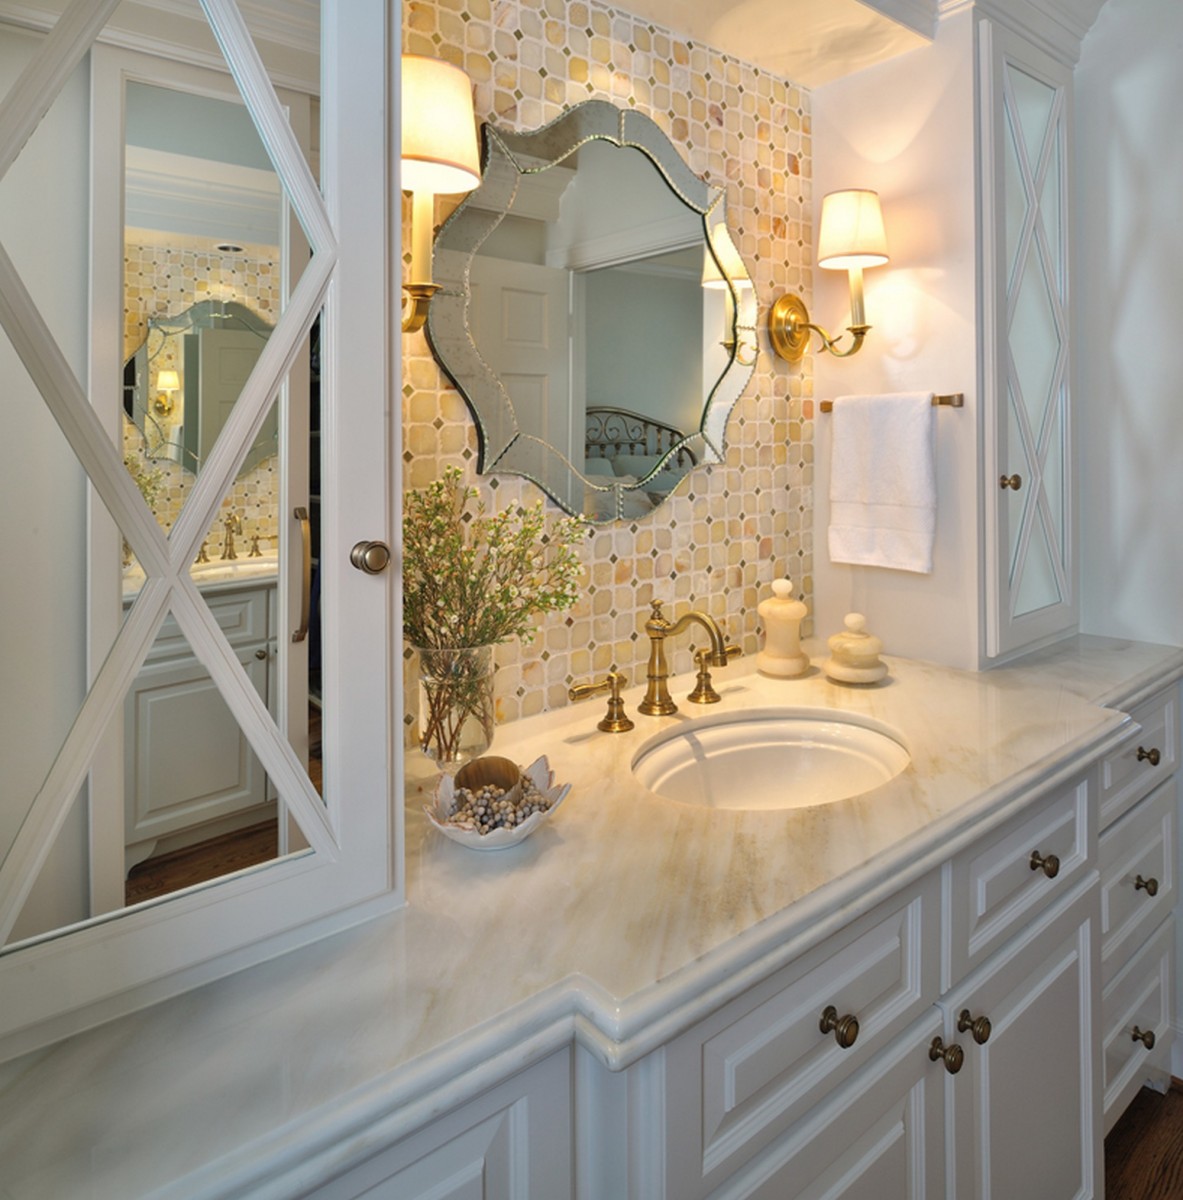 Interesting shaped mirror and mirrored cabinets (eastsidehomelink)